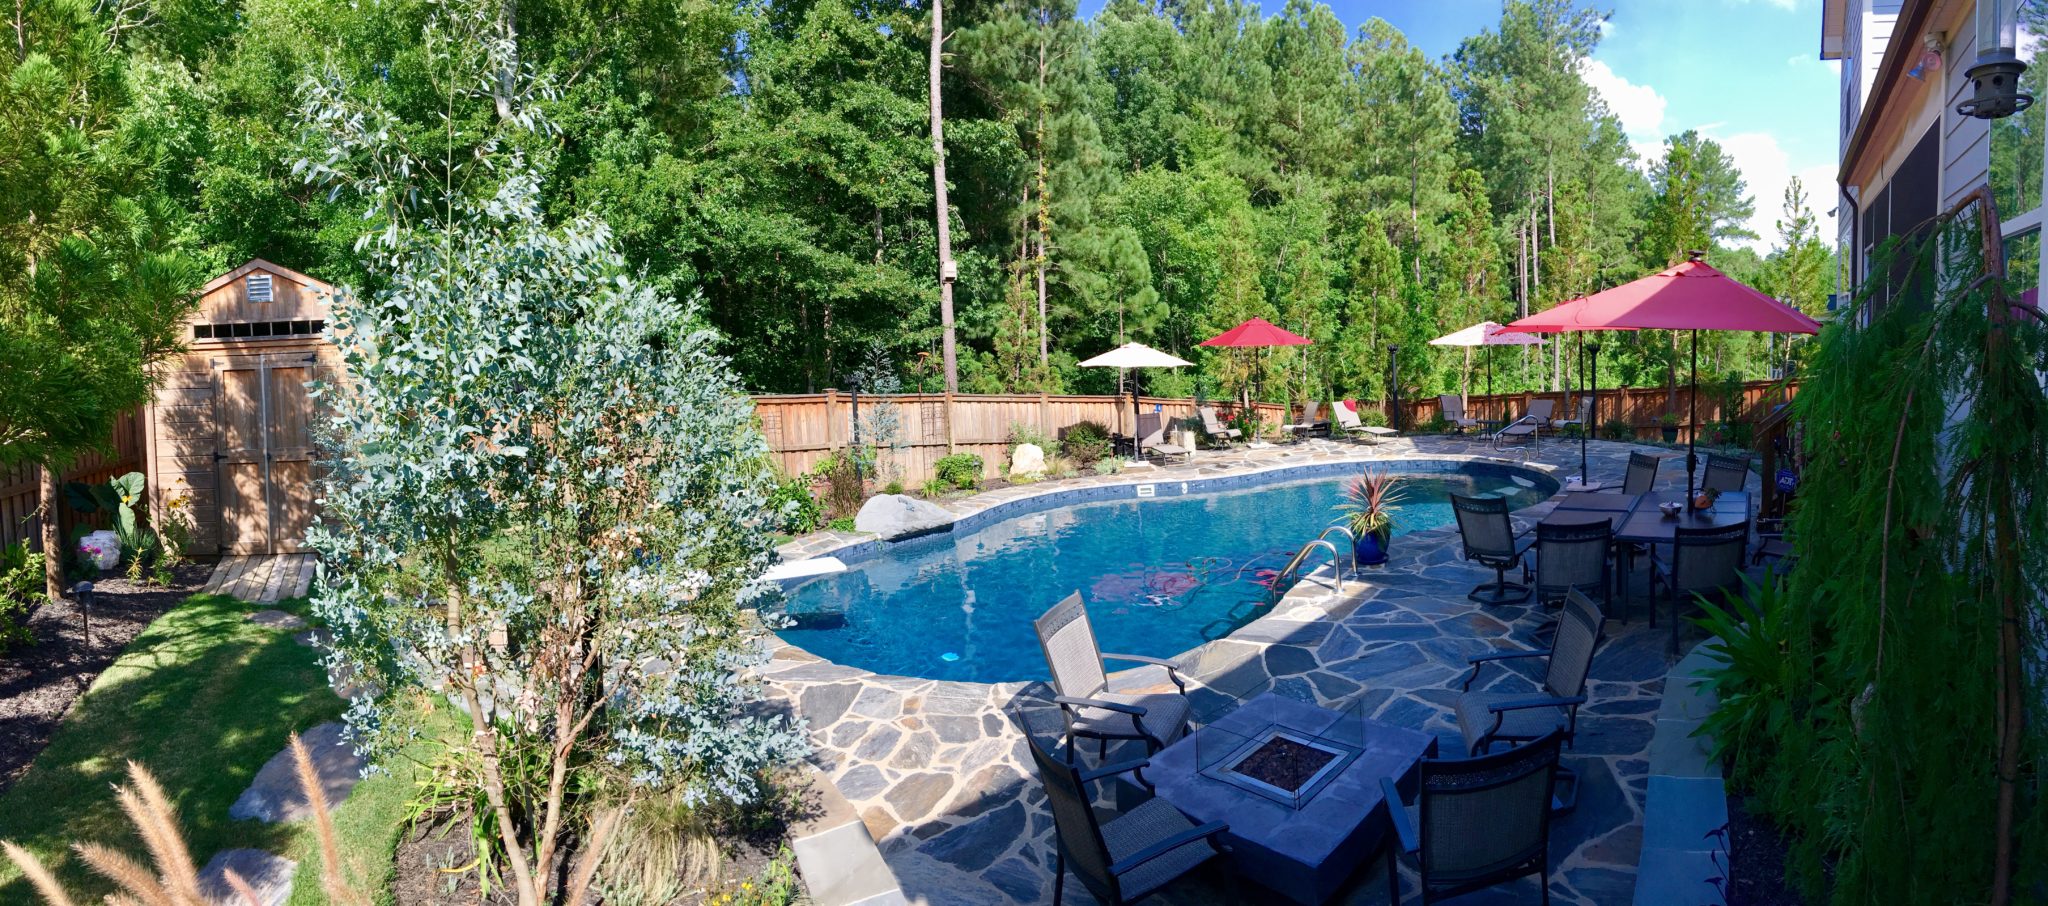 Rising sun pools and spas backyard pool with plants and furniture